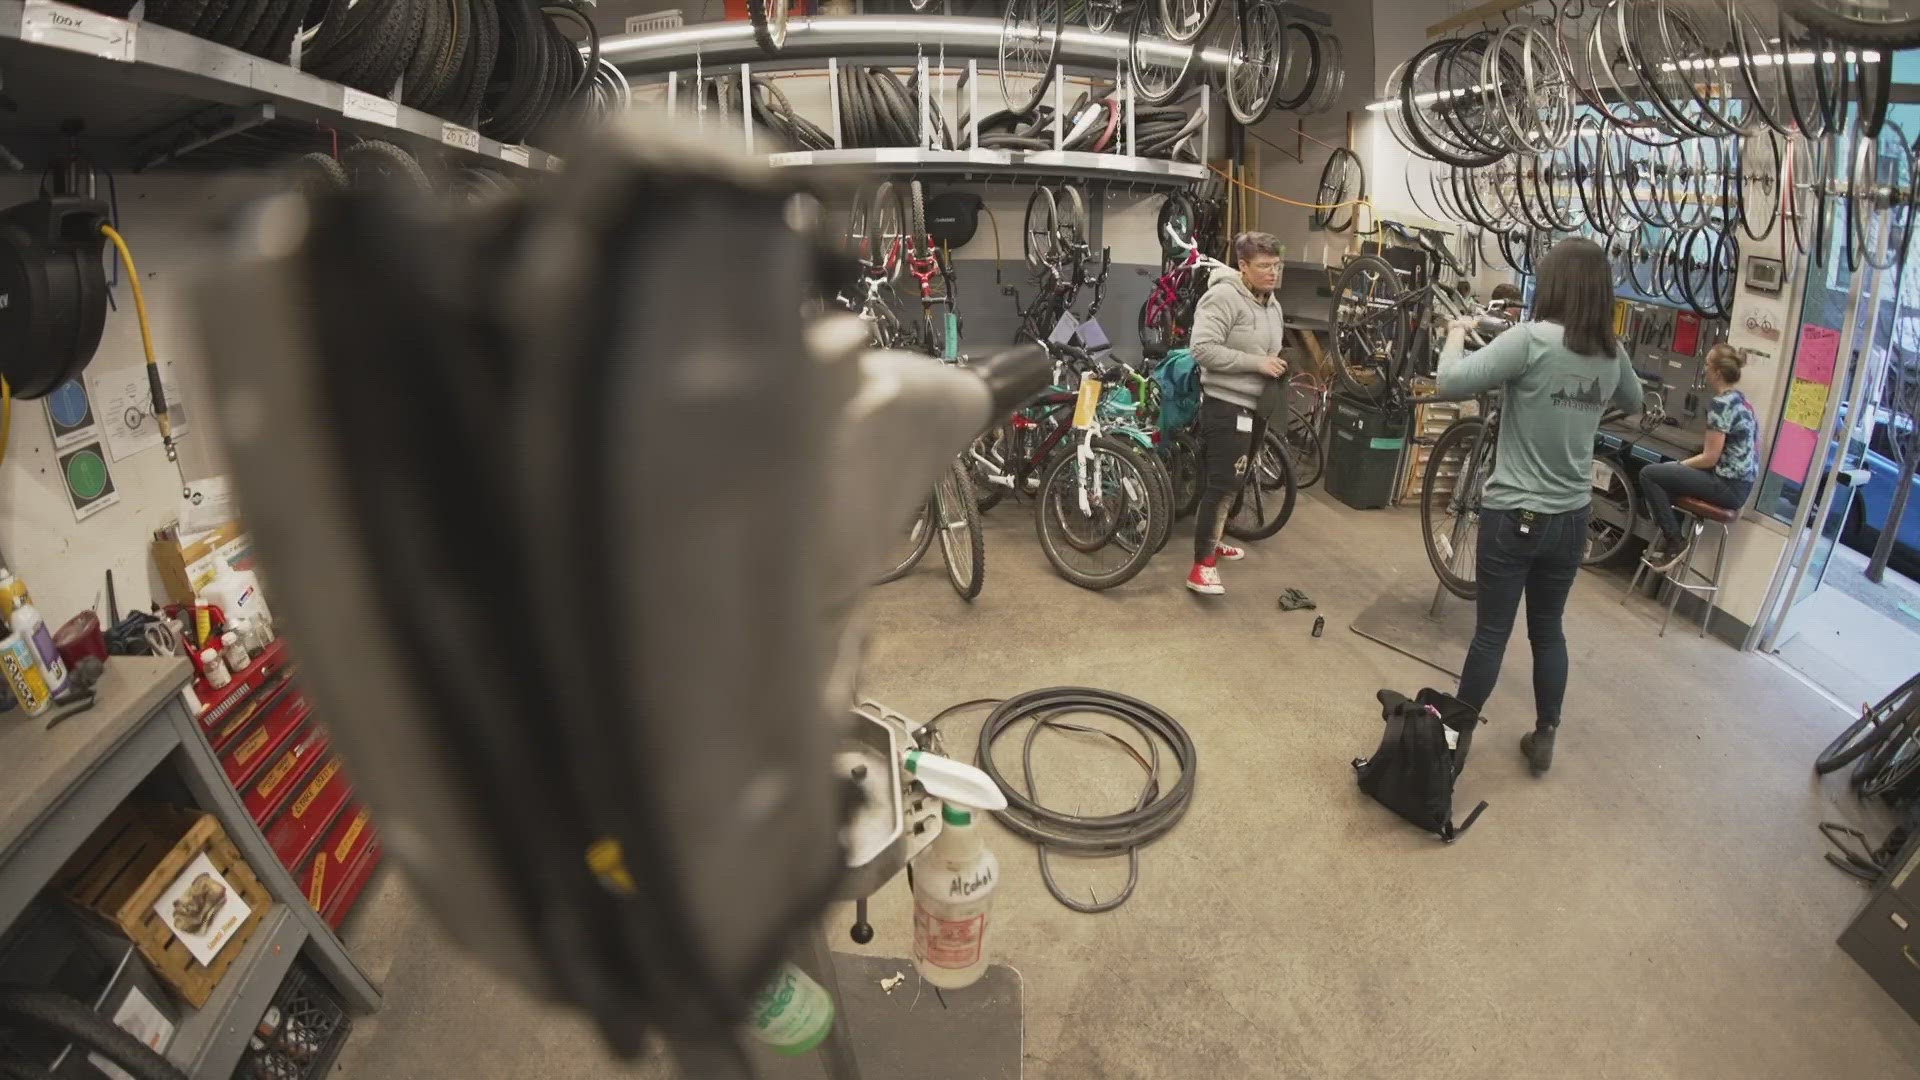 GEM Night is at Bikes Together, a non-profit bike shop, on the last Thursday of every month.